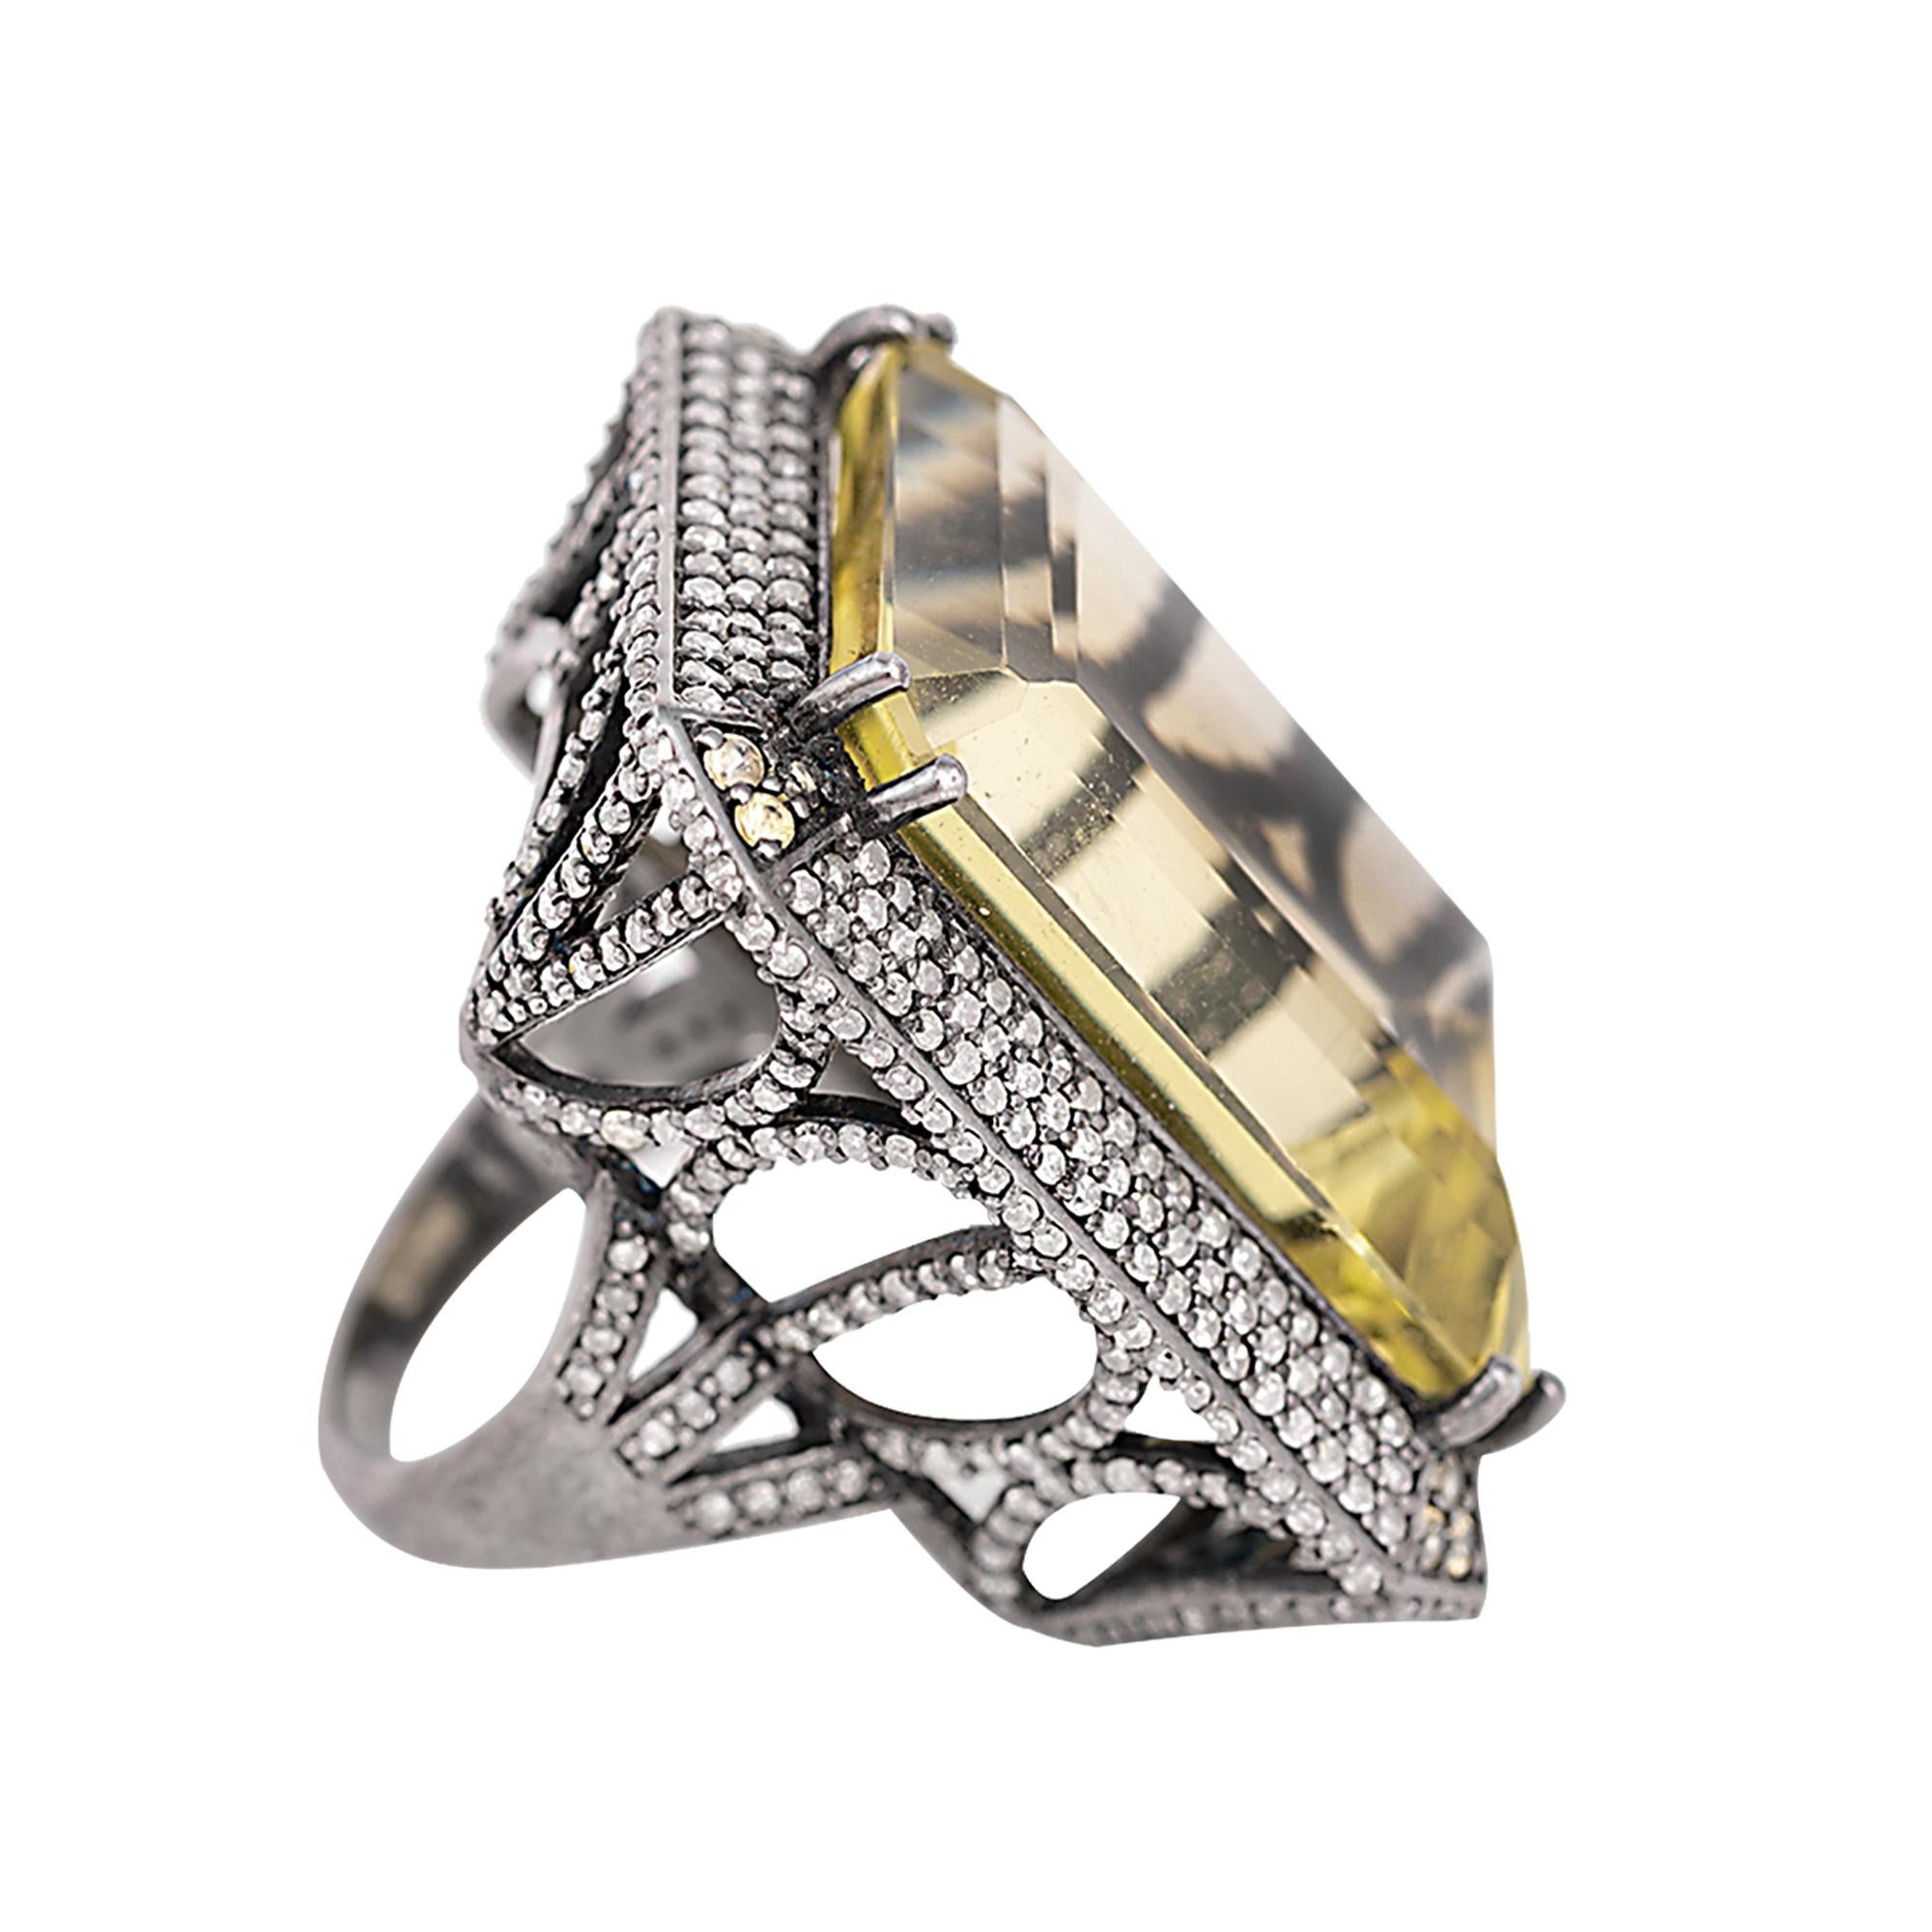 47.81 Carat Lemon Topaz and Diamond Cluster Cocktail Ring in Victorian Style

This Victorian era art-deco style incredulous lemon topaz and diamond ring is marvelous. The 47.81 carat fully transparent solitaire emerald-cut citrine set in